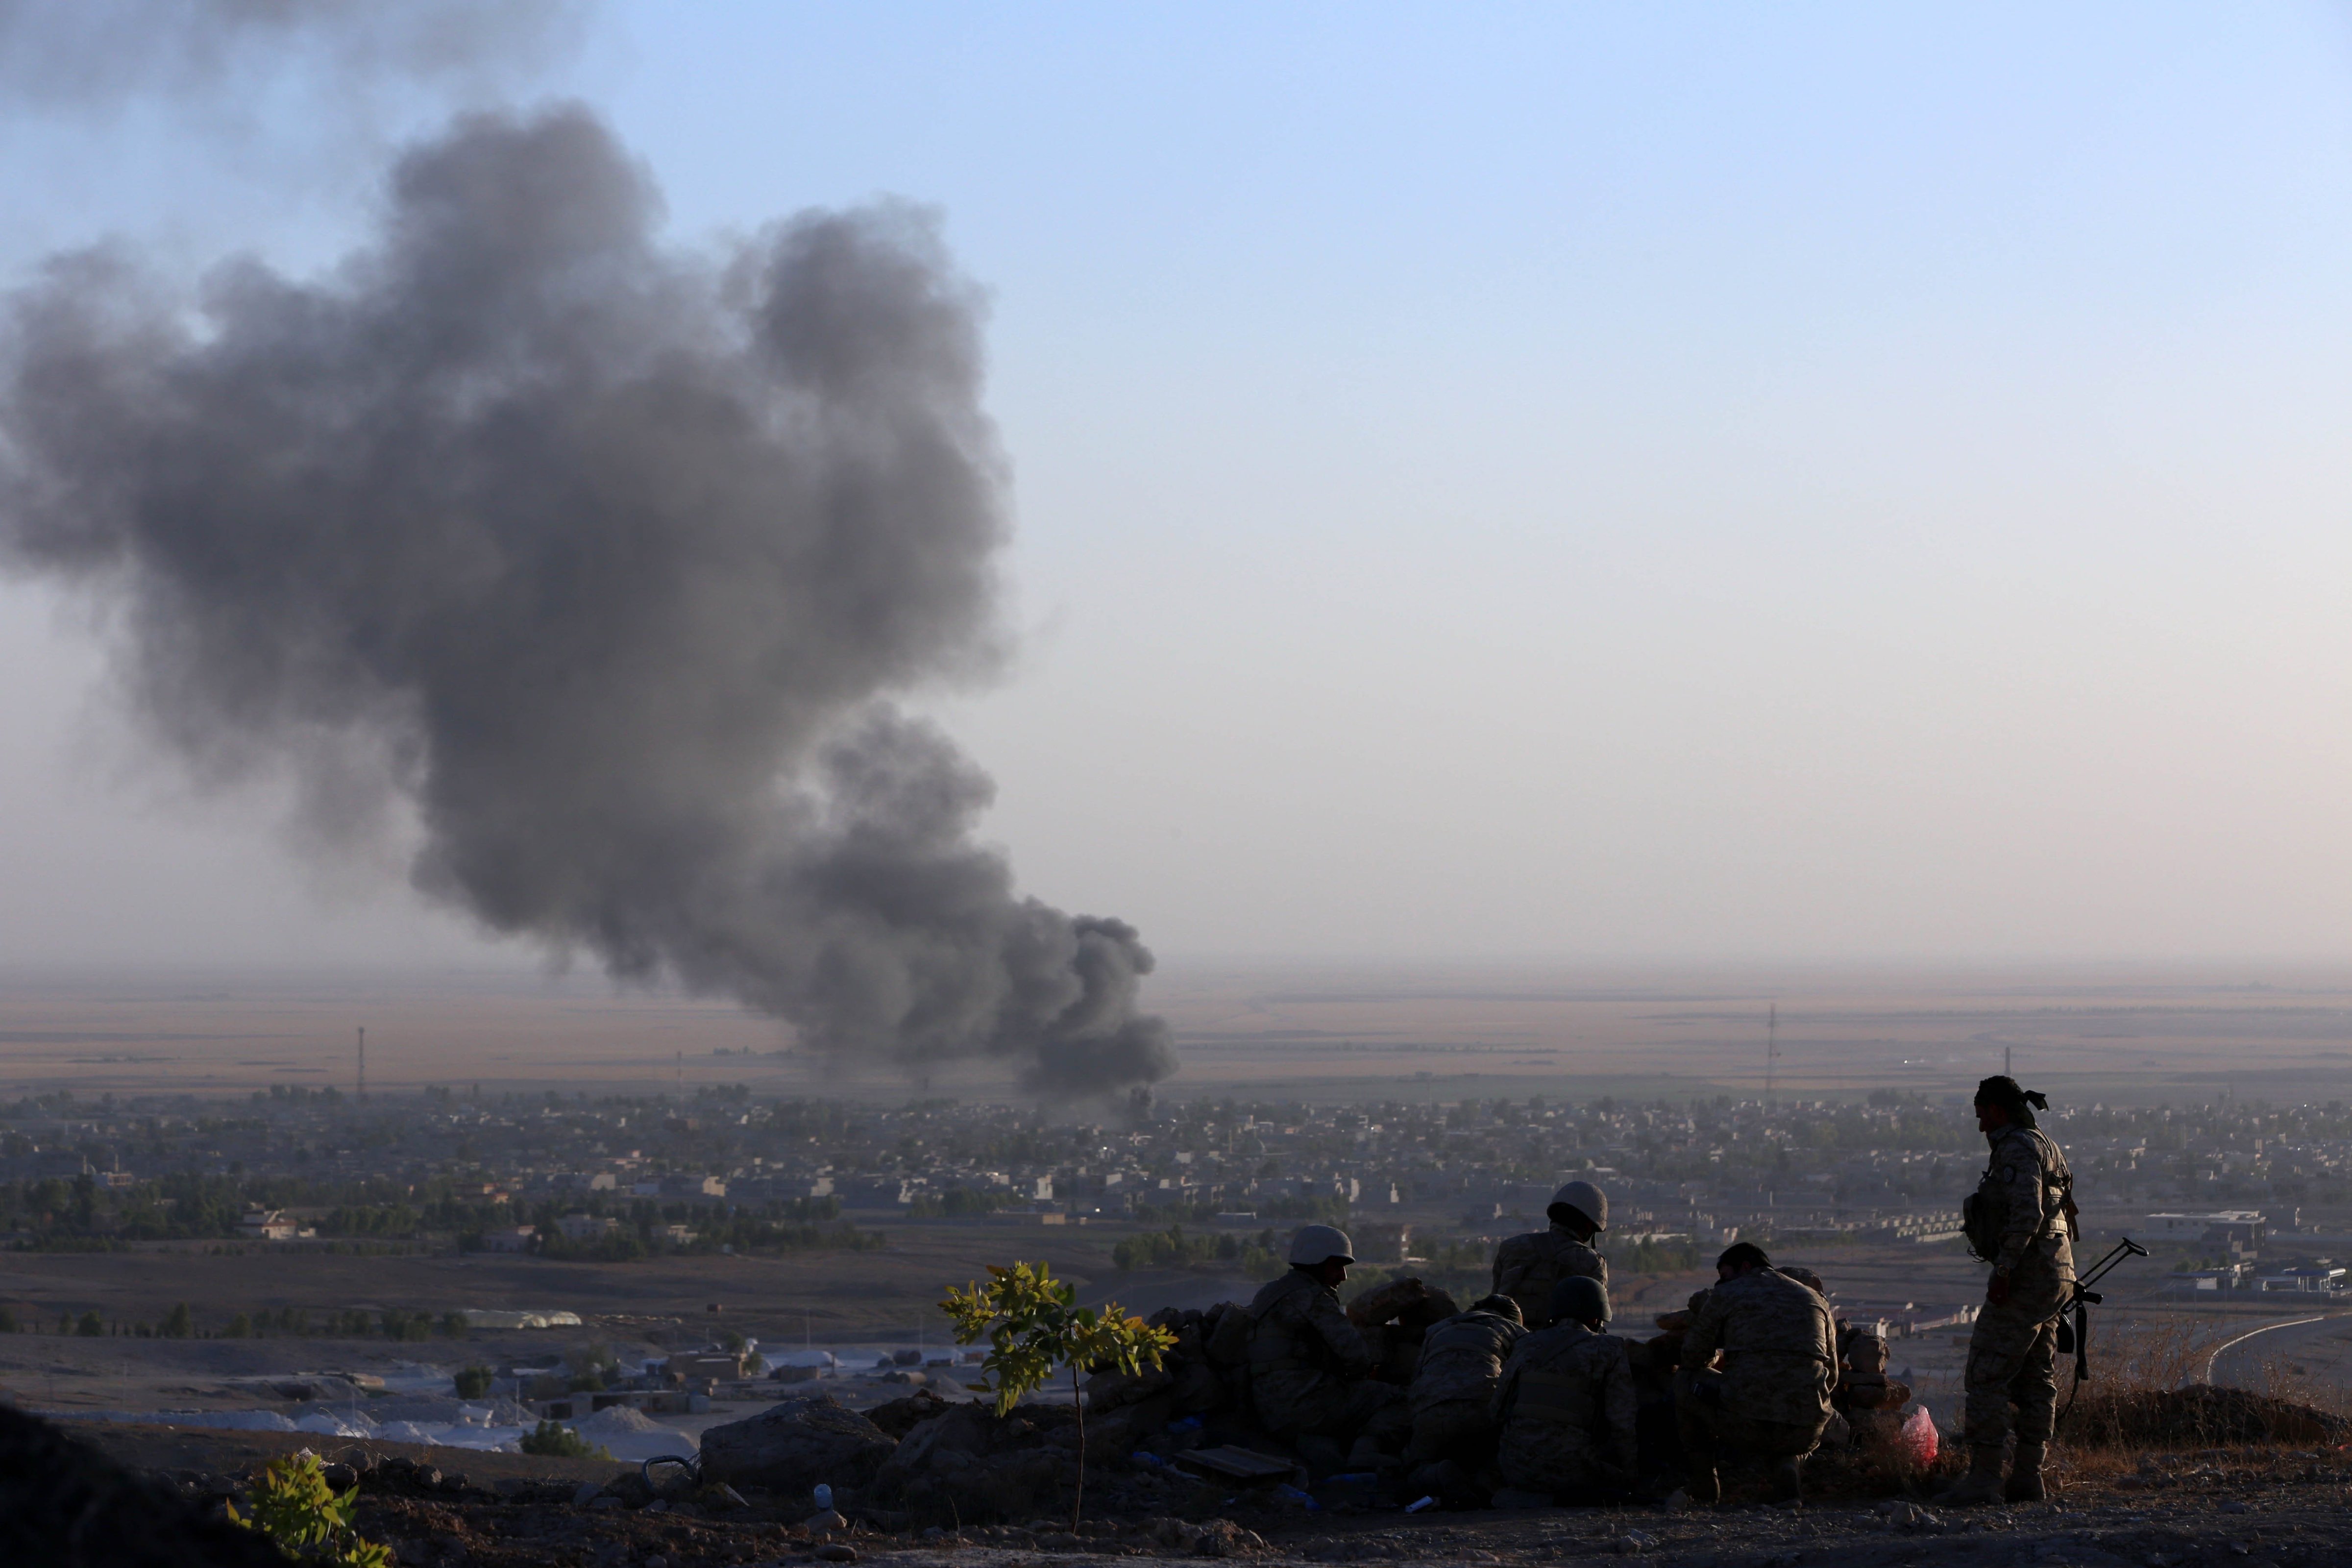 Iraqi Kurdish Peshmerga fighters look on as smoke billows from the town Makhmur, about 175 miles north of Baghdad, during clashes with ISIS militants on August 9, 2014 (Safin Hamed—AFP/Getty Images)